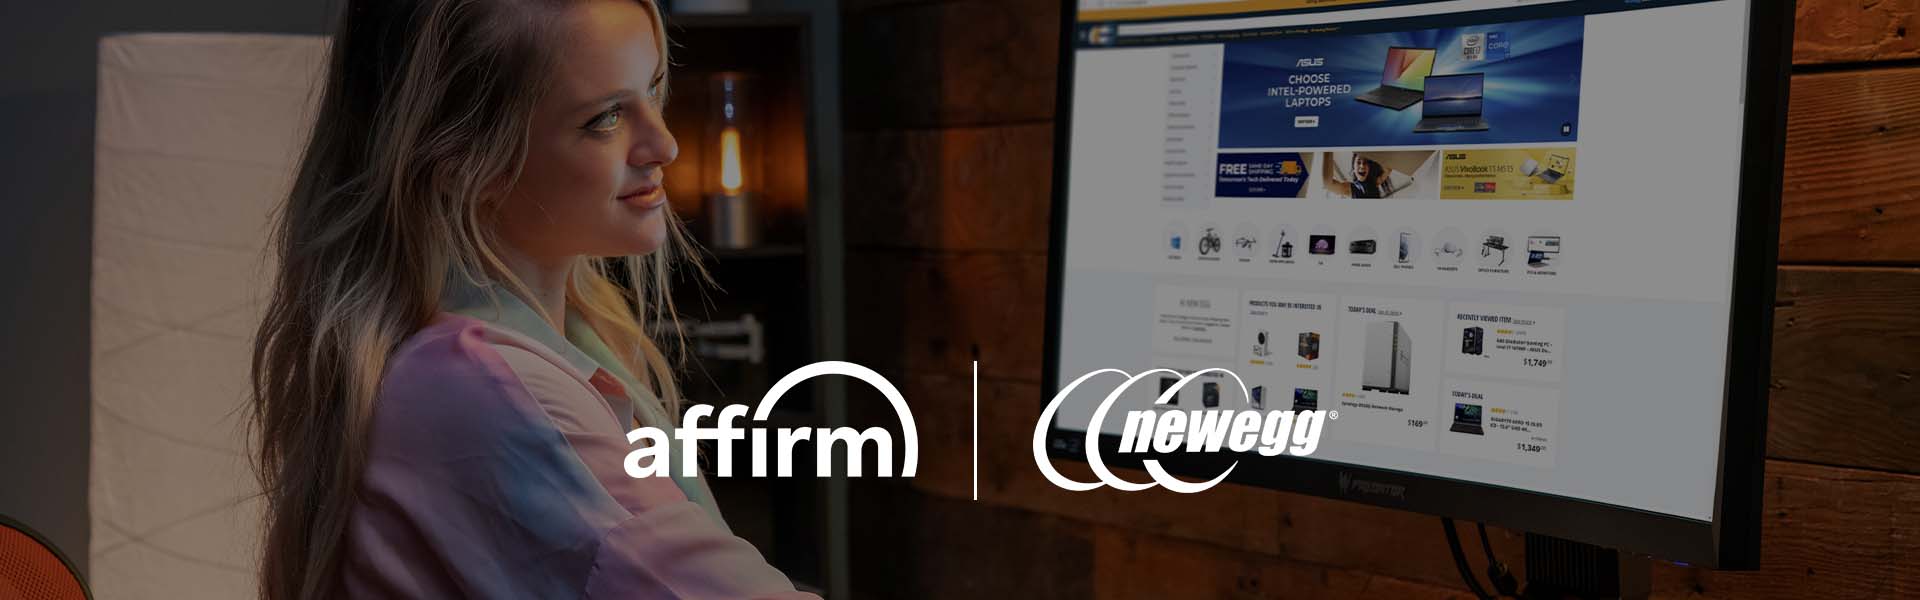 Newegg Partners with Affirm to Give Customers Greater Payment Flexibility on Newegg.com